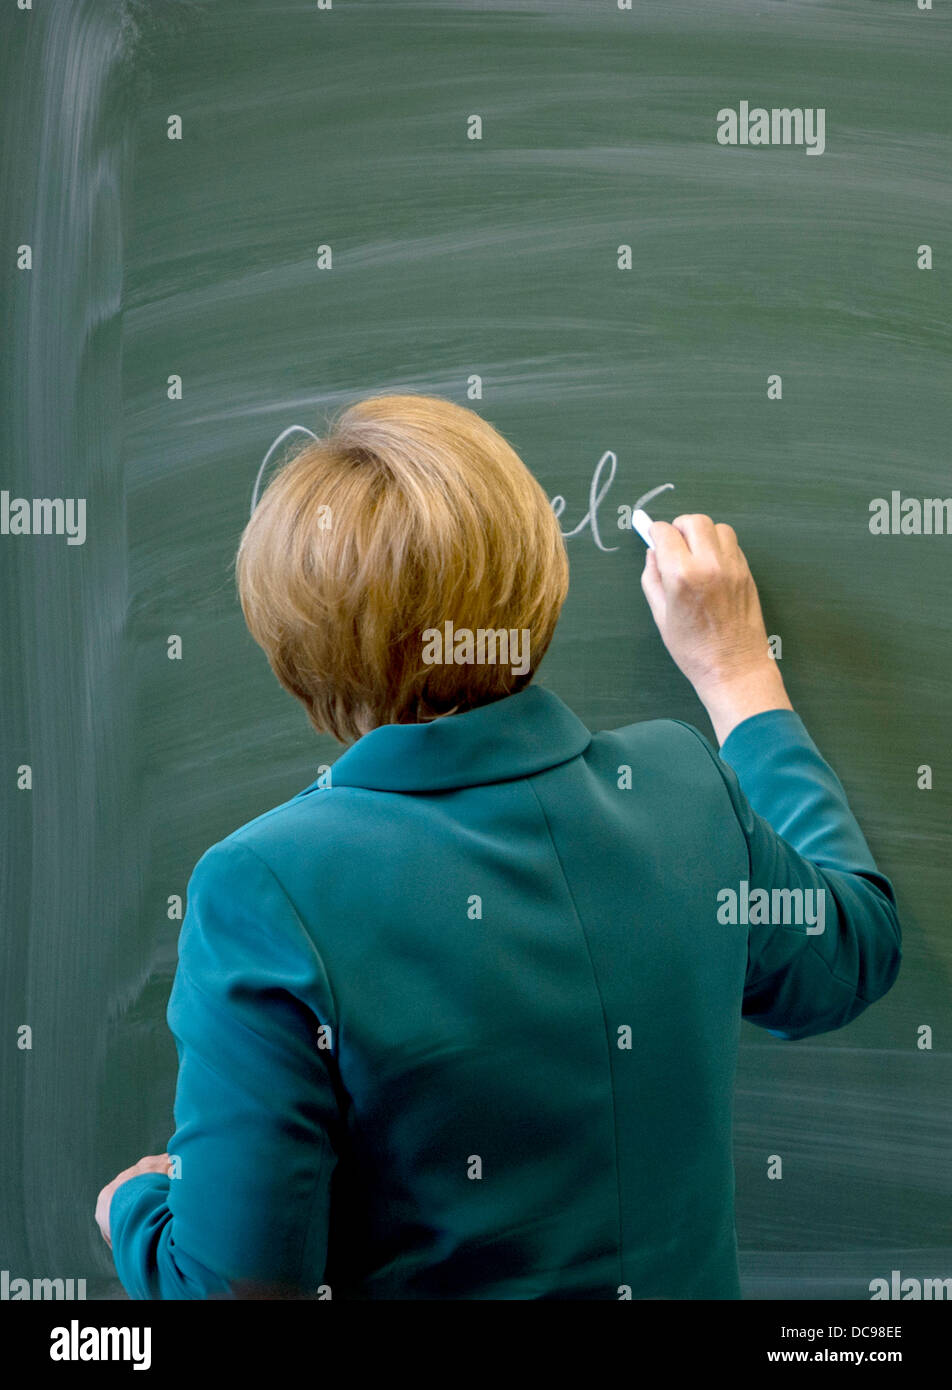 Berlin, Germany. 13th Aug, 2013. German Chancellor Angela Merkel writes her name on the black board before starting her lecture on the building of the Berlin wall August 13th,1961 to a 12th grade class during her visit to the Heinrich Schliemann Gymnasium, secondary school in Berlin, Germany on August 13, 2013. Photo: Odd Andersen dpa (c) dpa/Alamy Live News Stock Photo